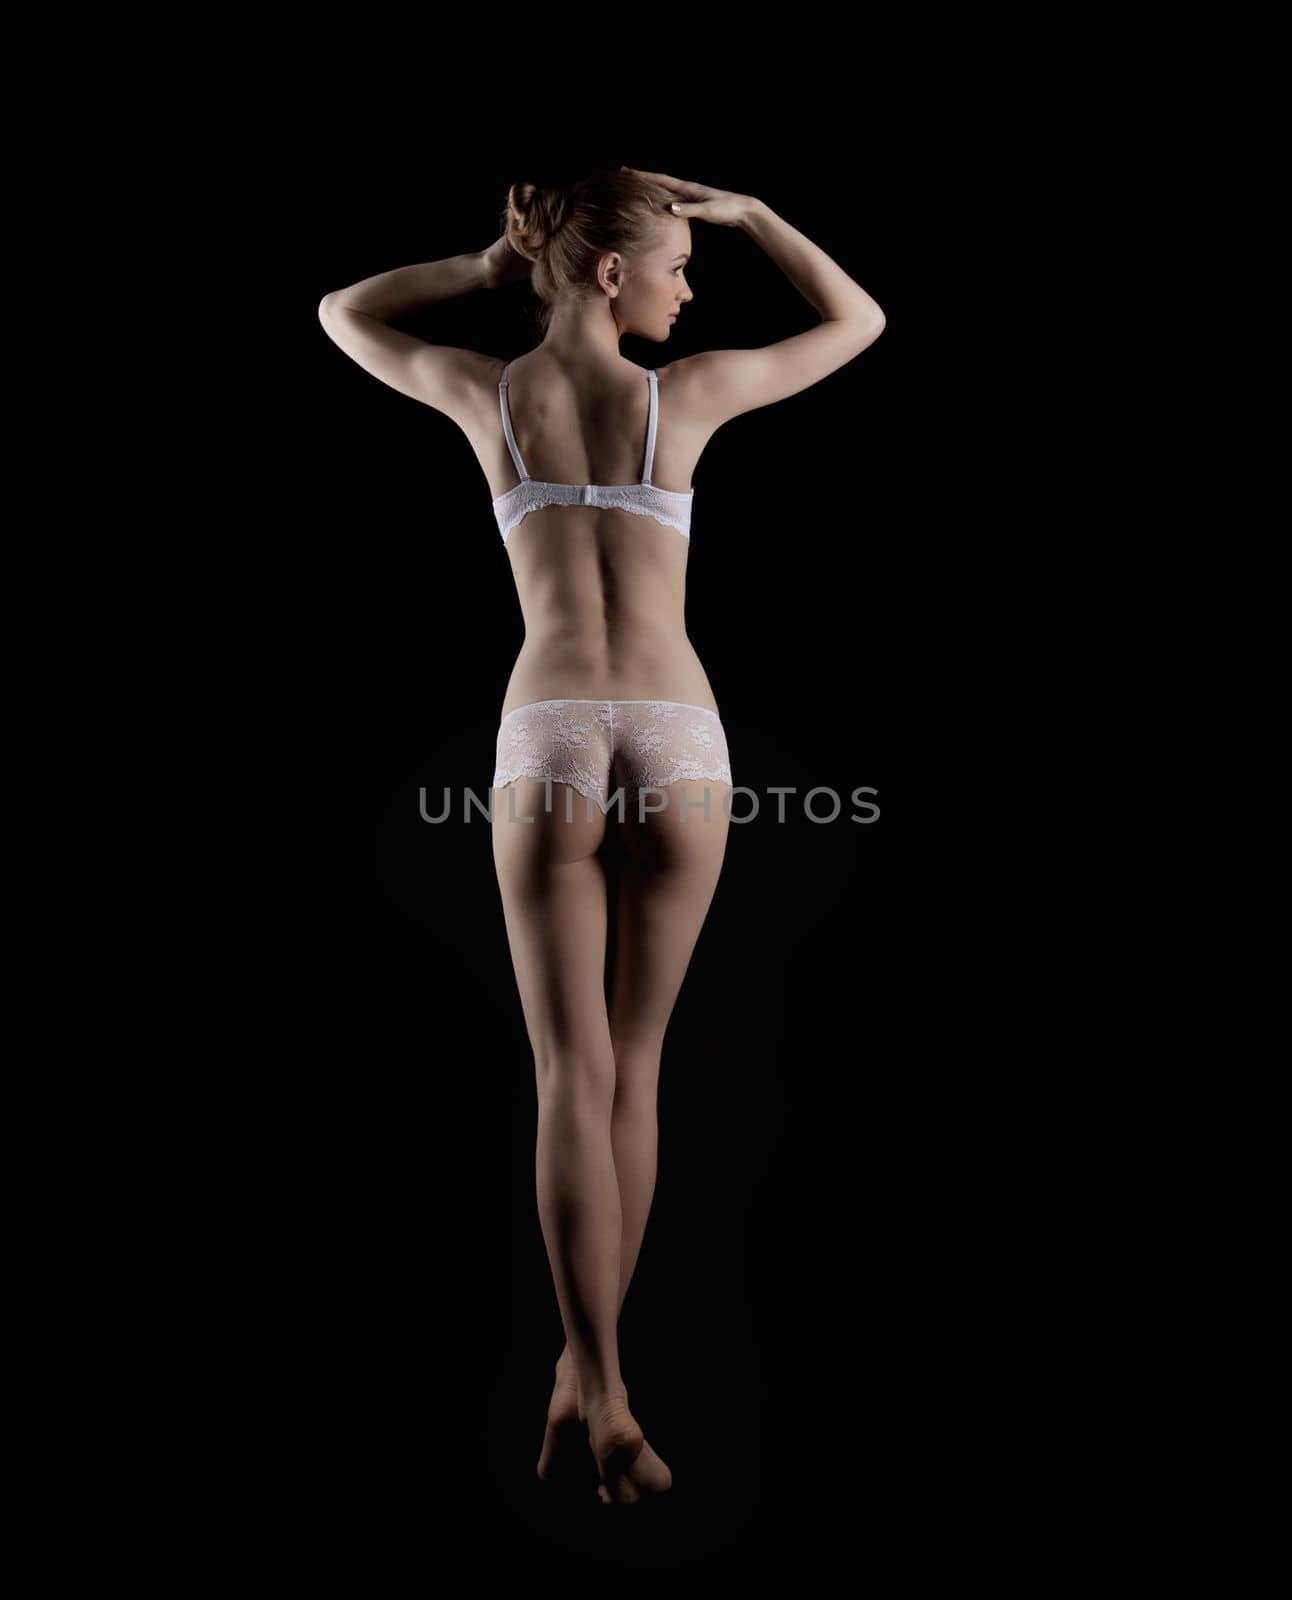 Attractive young woman stand in beauty white lingerie in dark